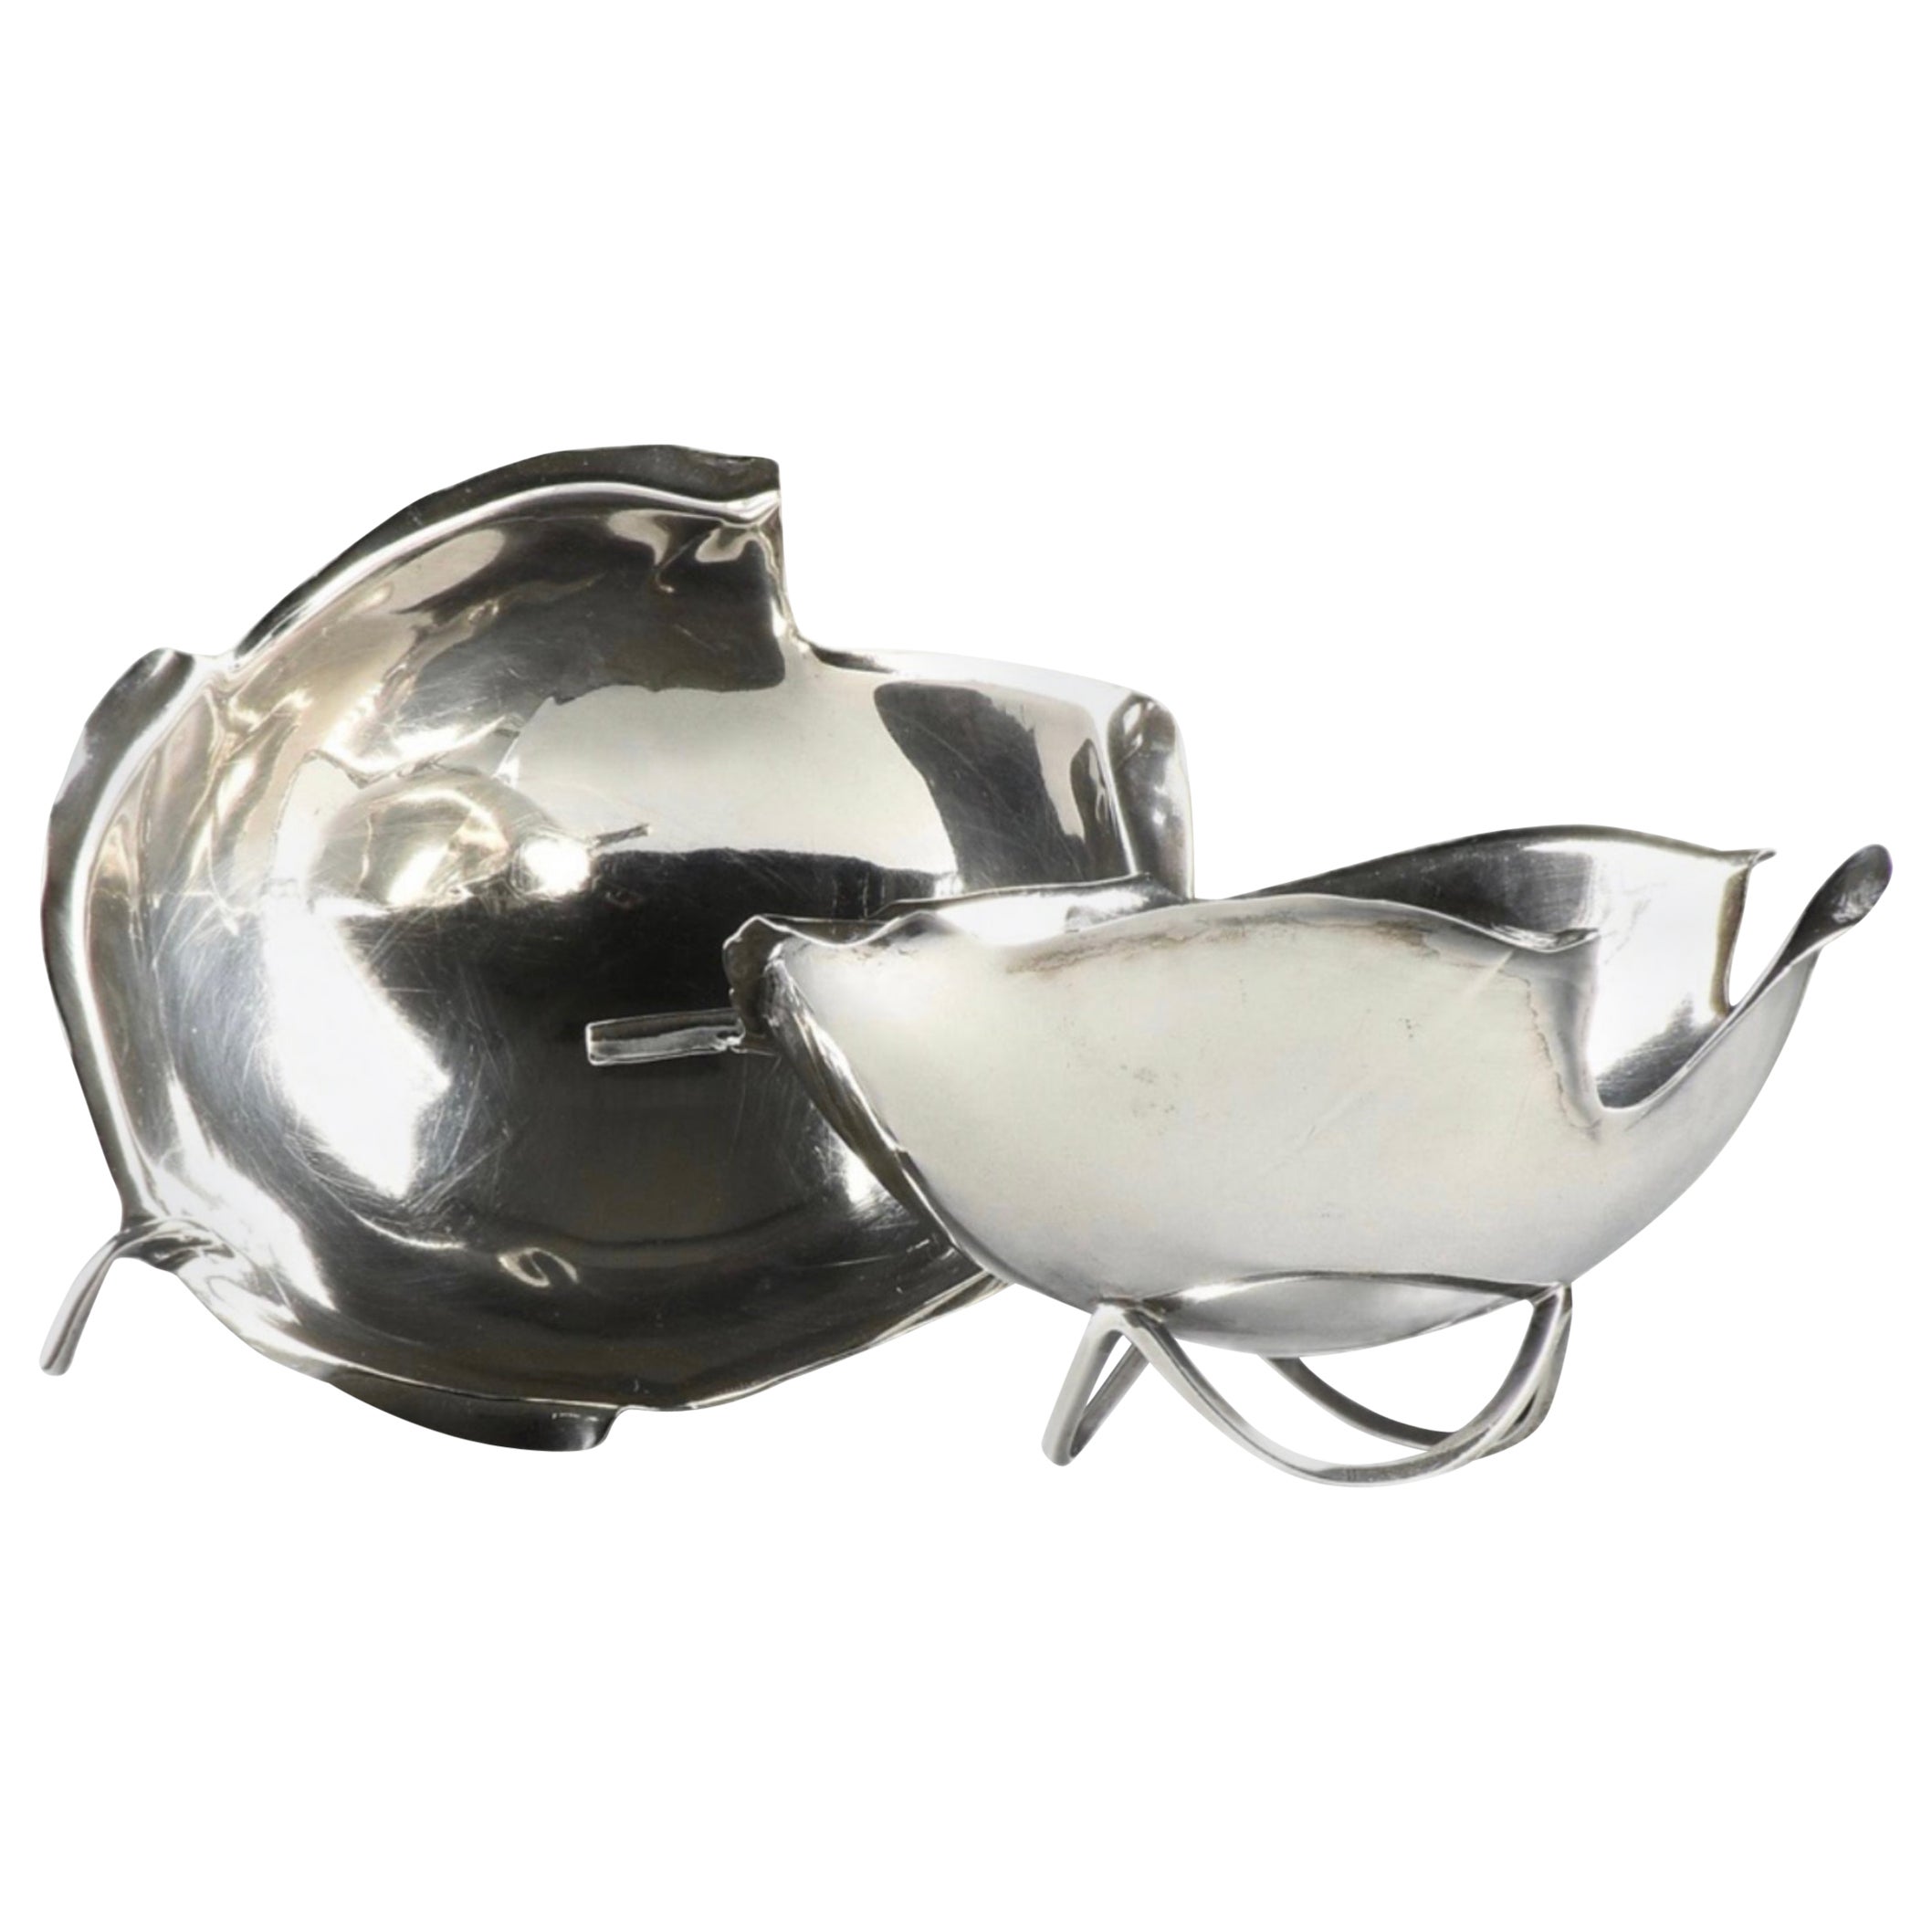 Alfredo Sciarotta Cartier Sterling Silver Leaf Form Bowls, Pair For Sale